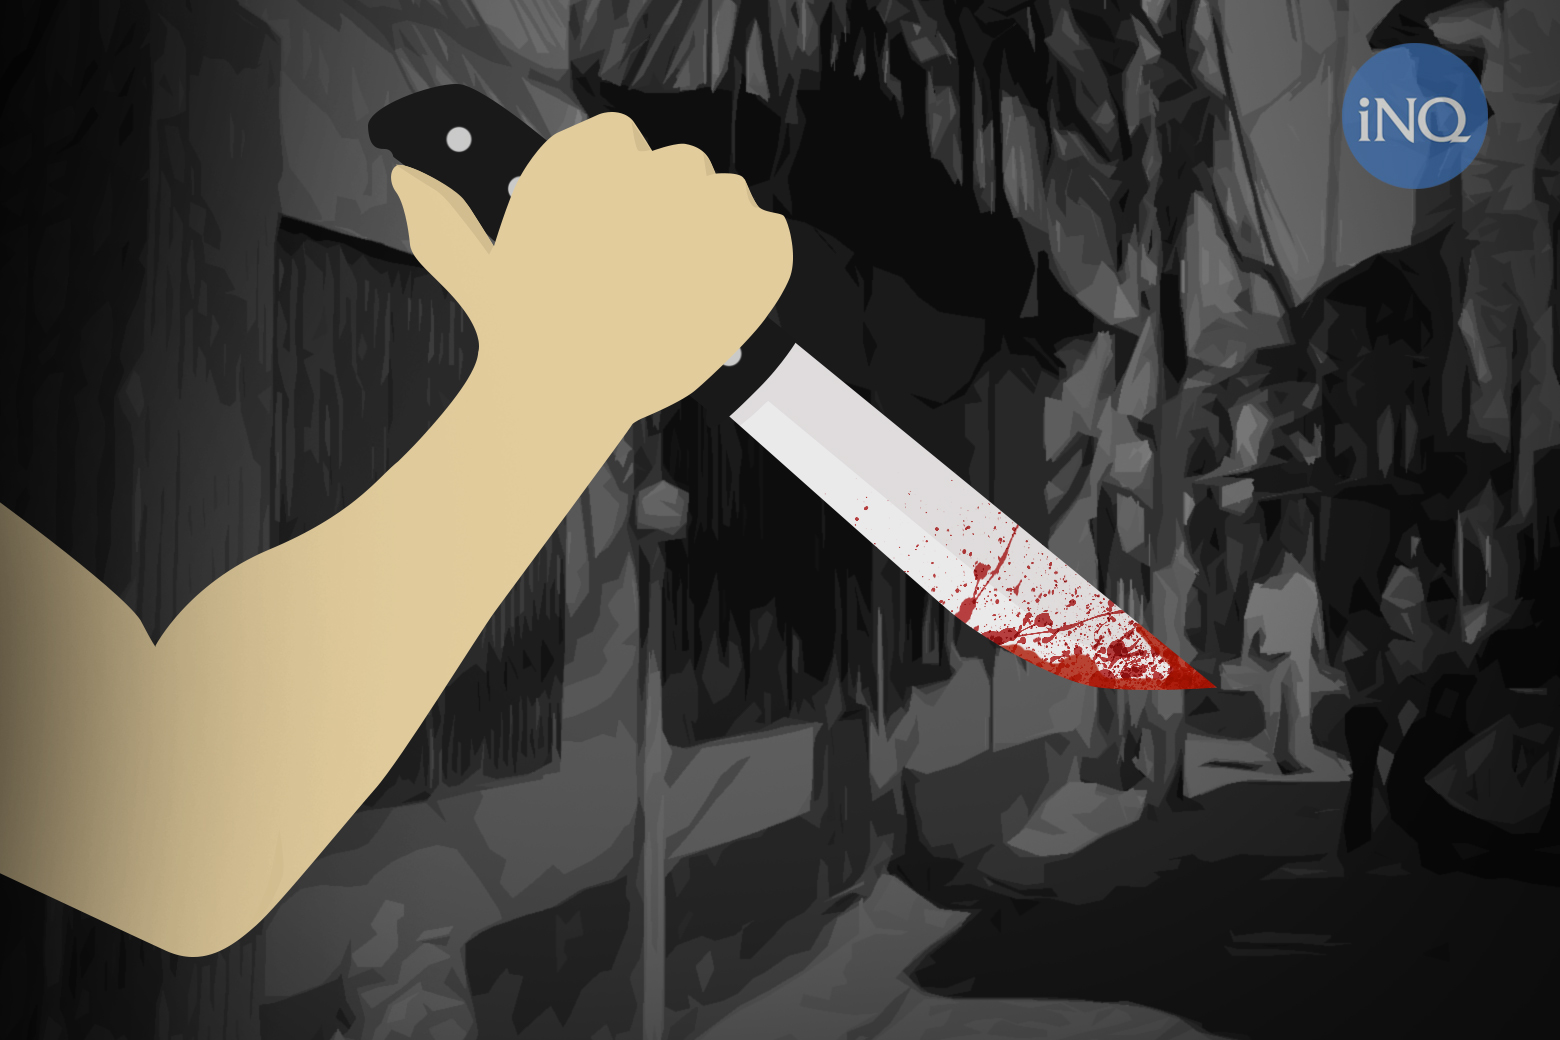 Man dies after being mauled, stabbed in Taguig City